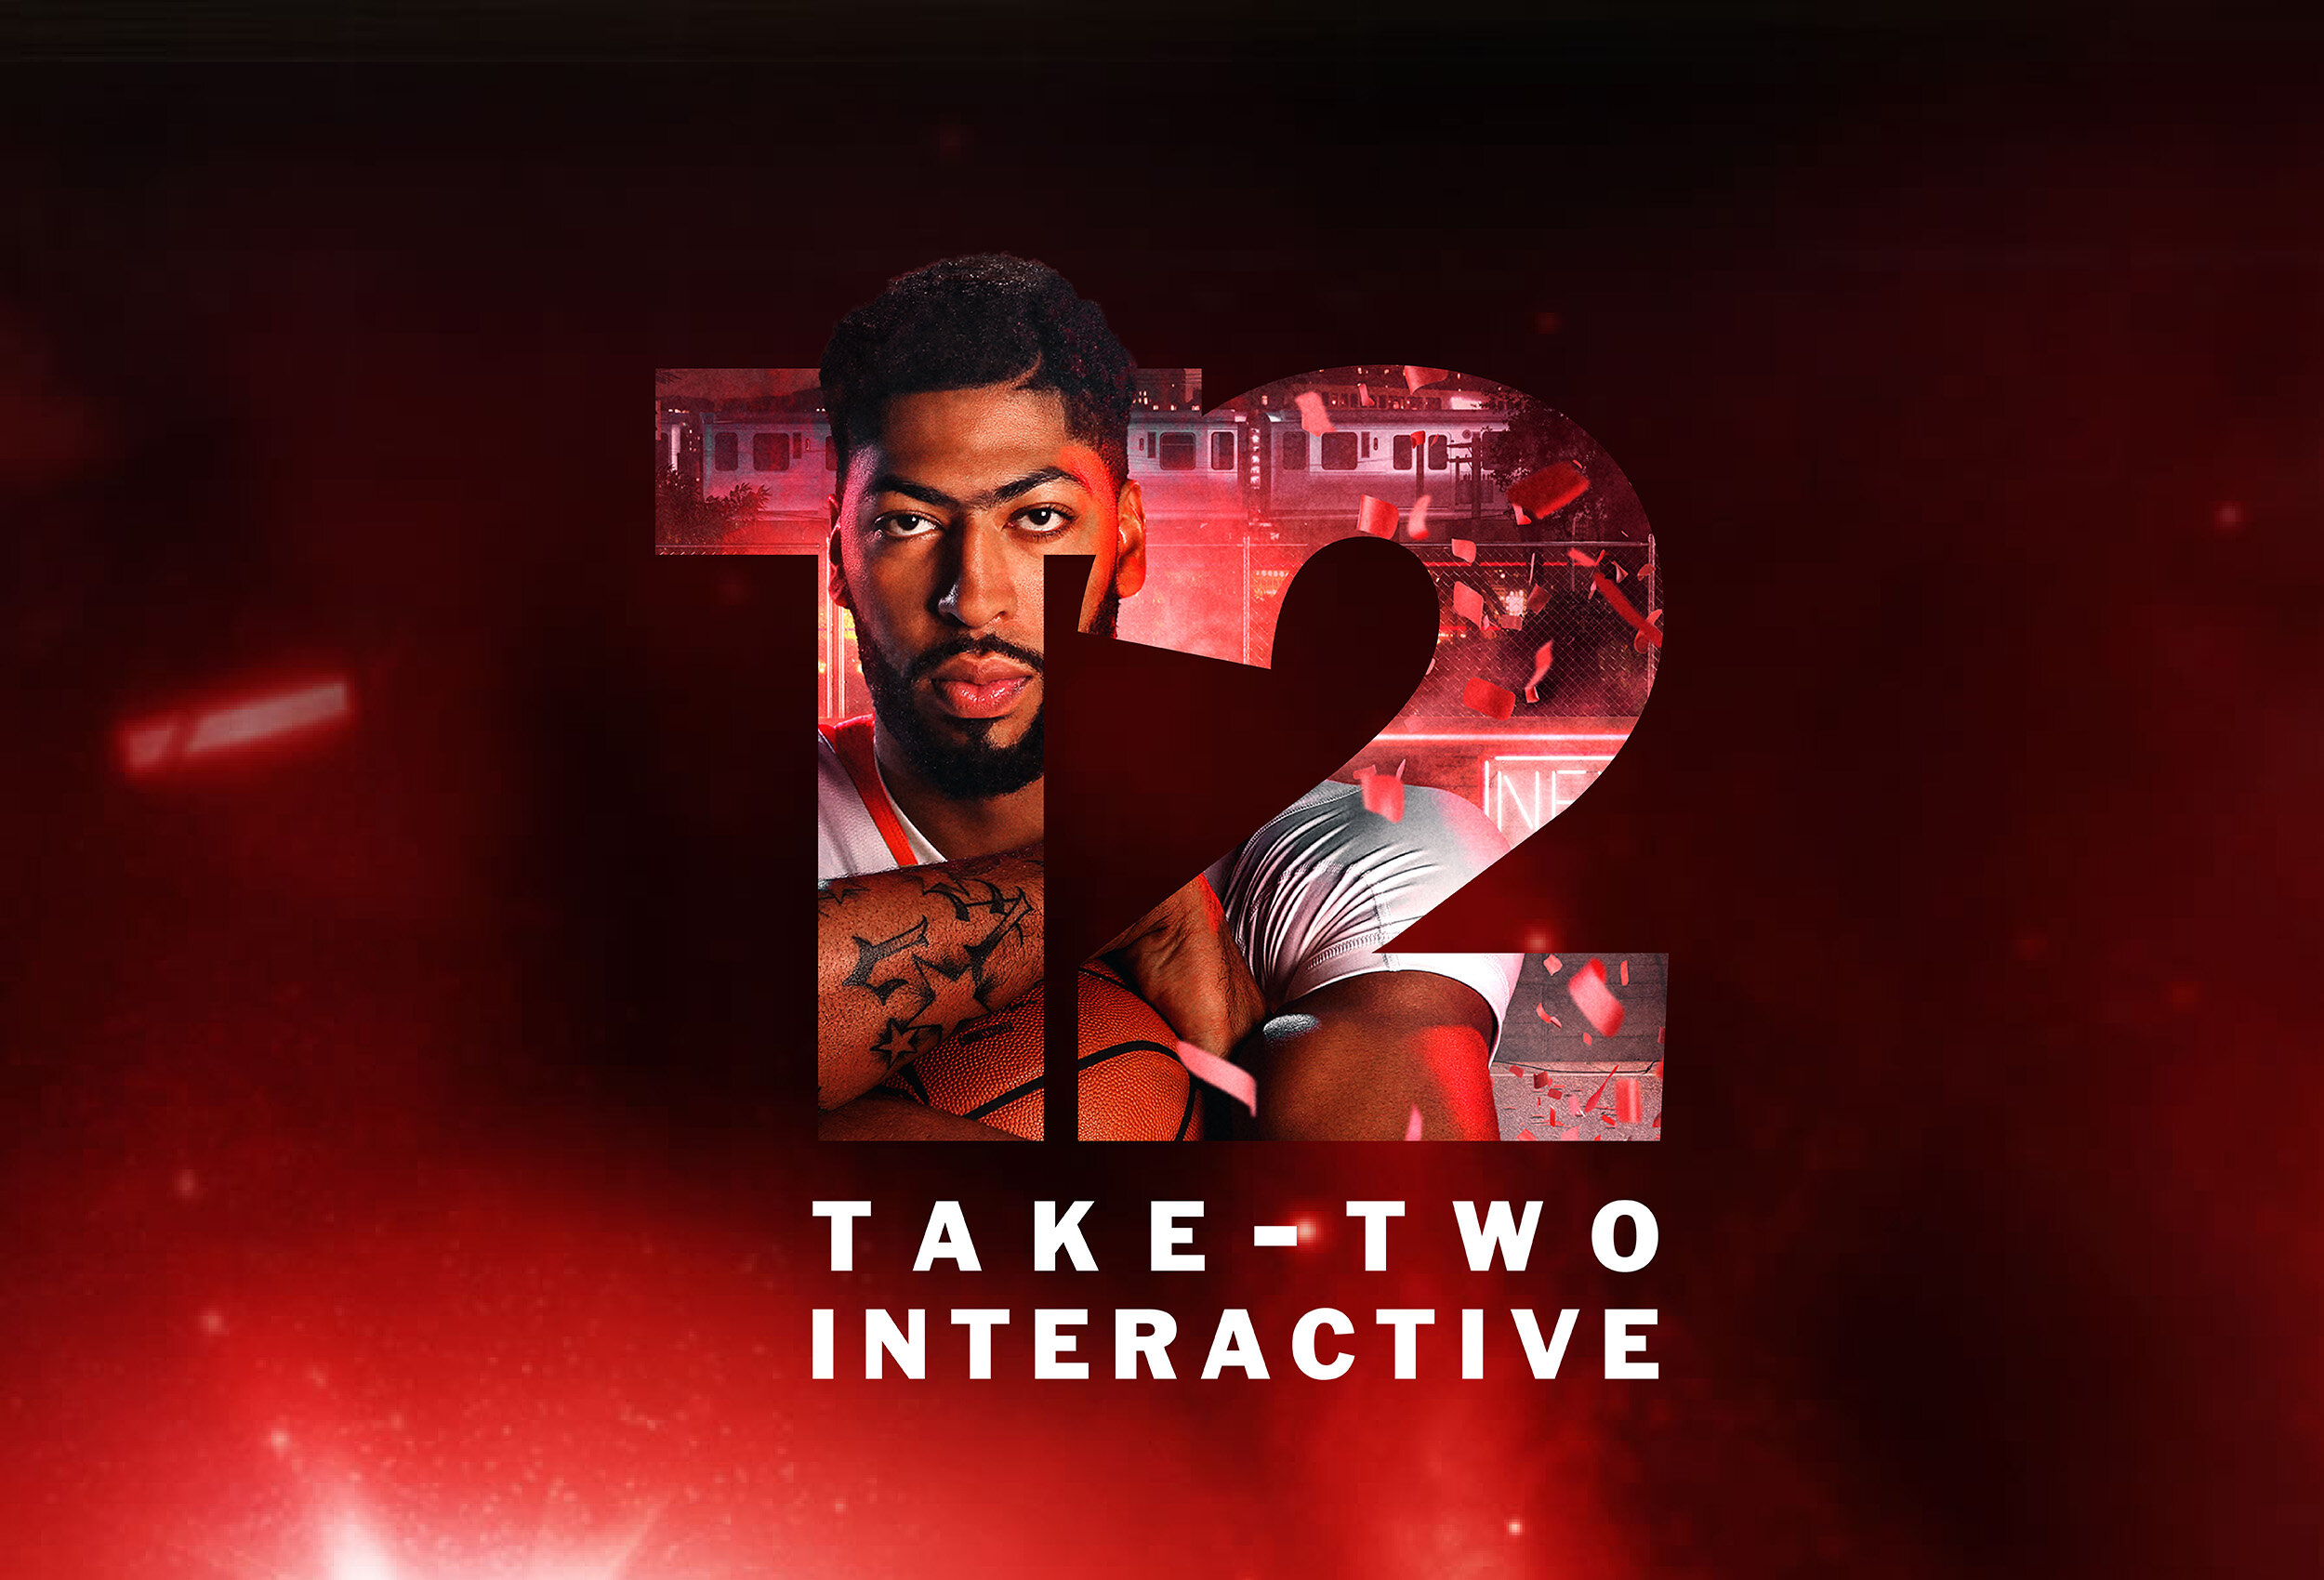 TAKE-TWO INTERACTIVE